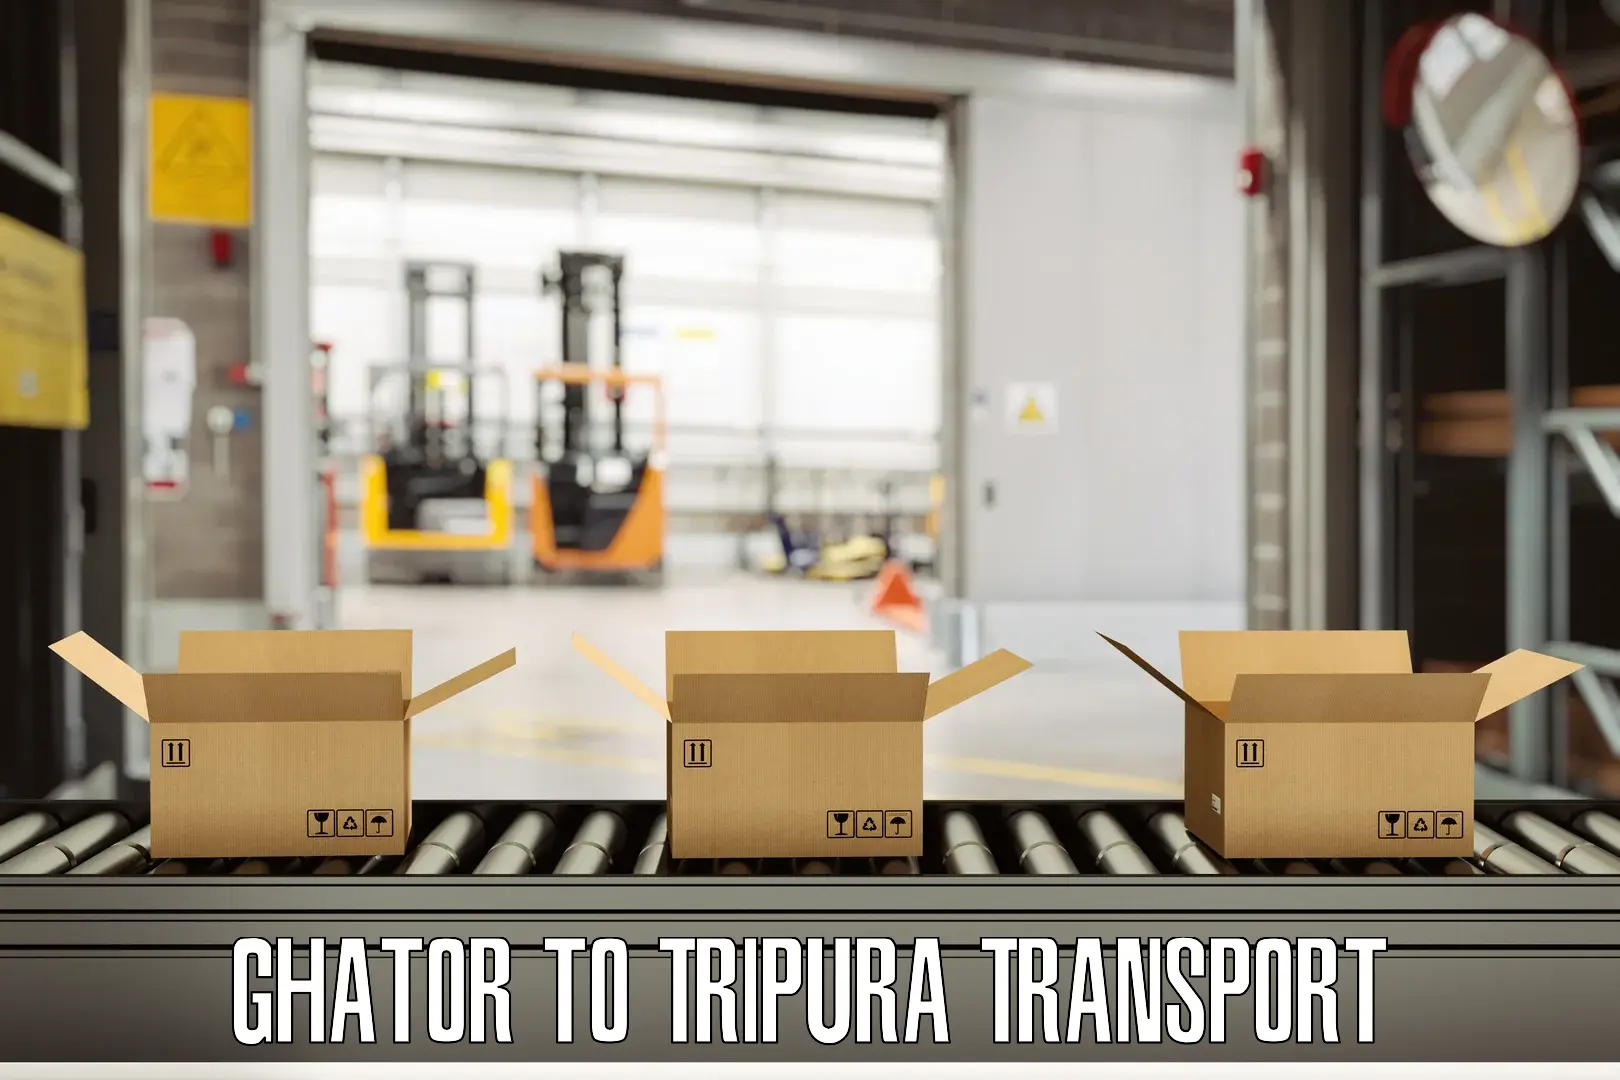 Air freight transport services Ghator to Tripura